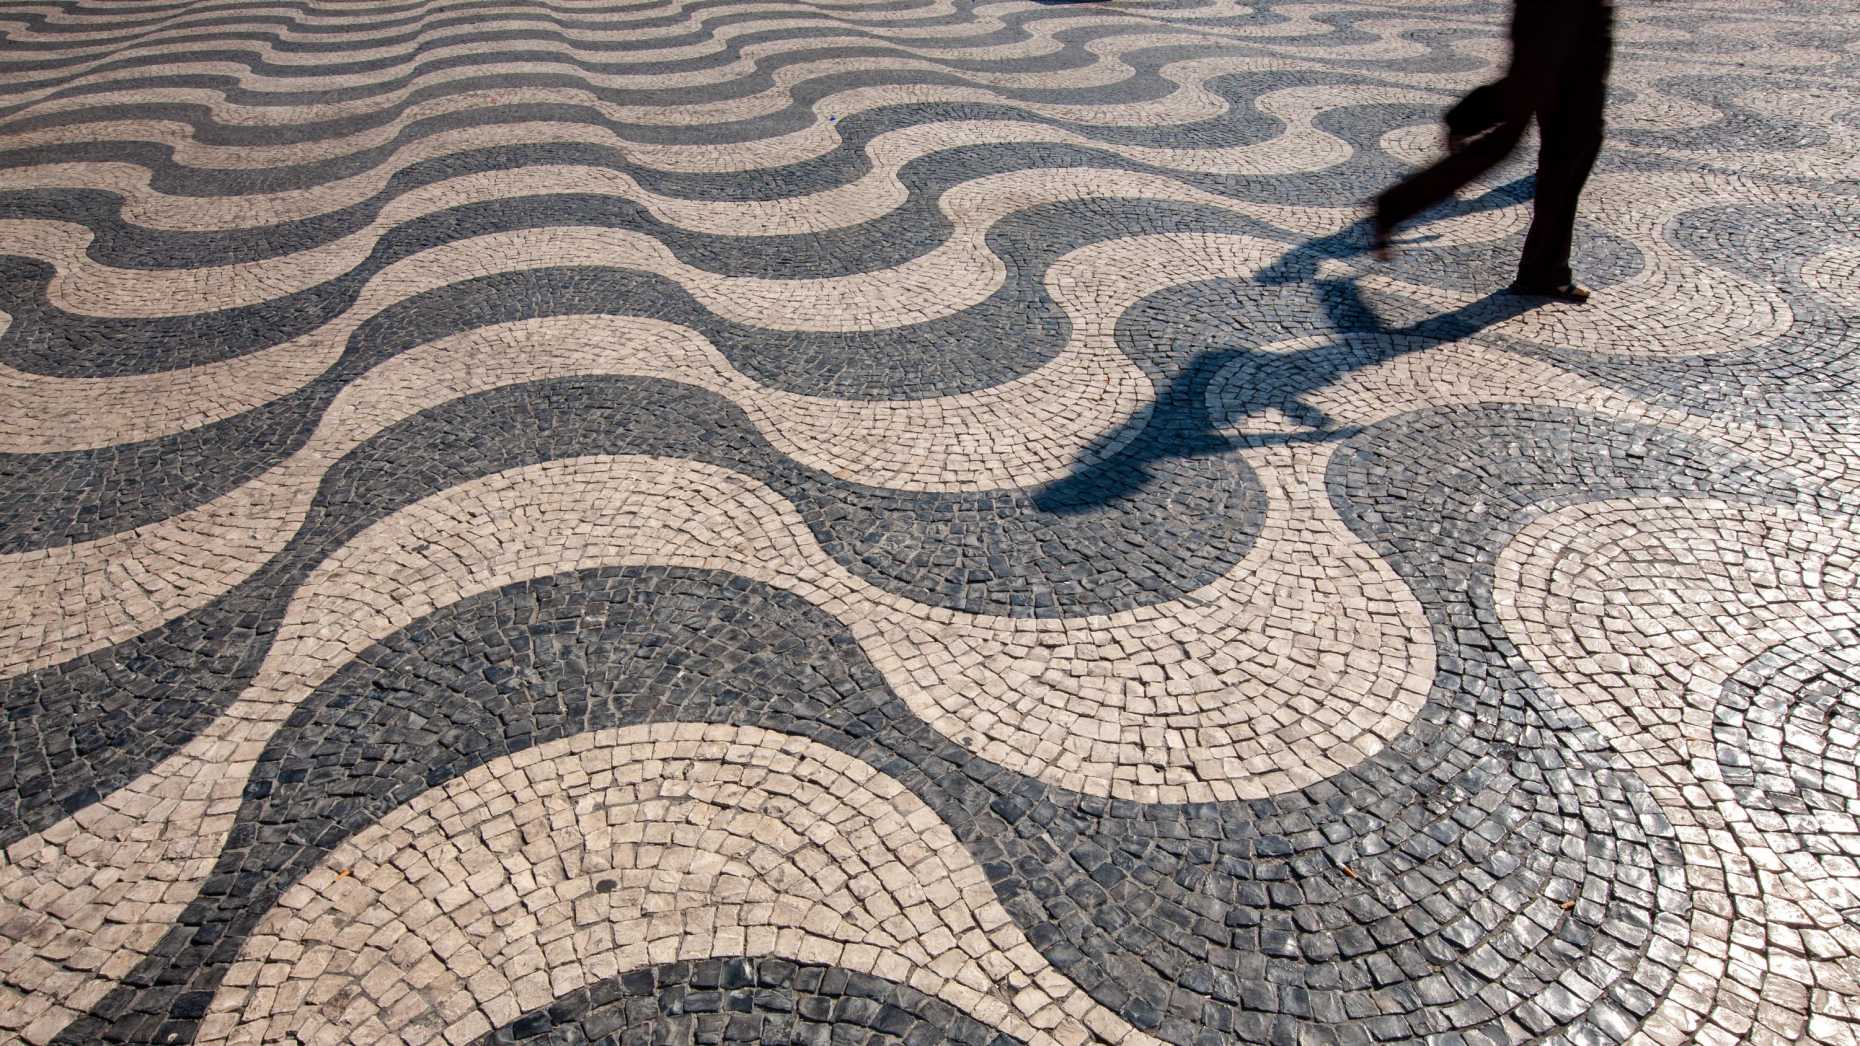 Pavement in Lissabon with a complex symmetrical pattern